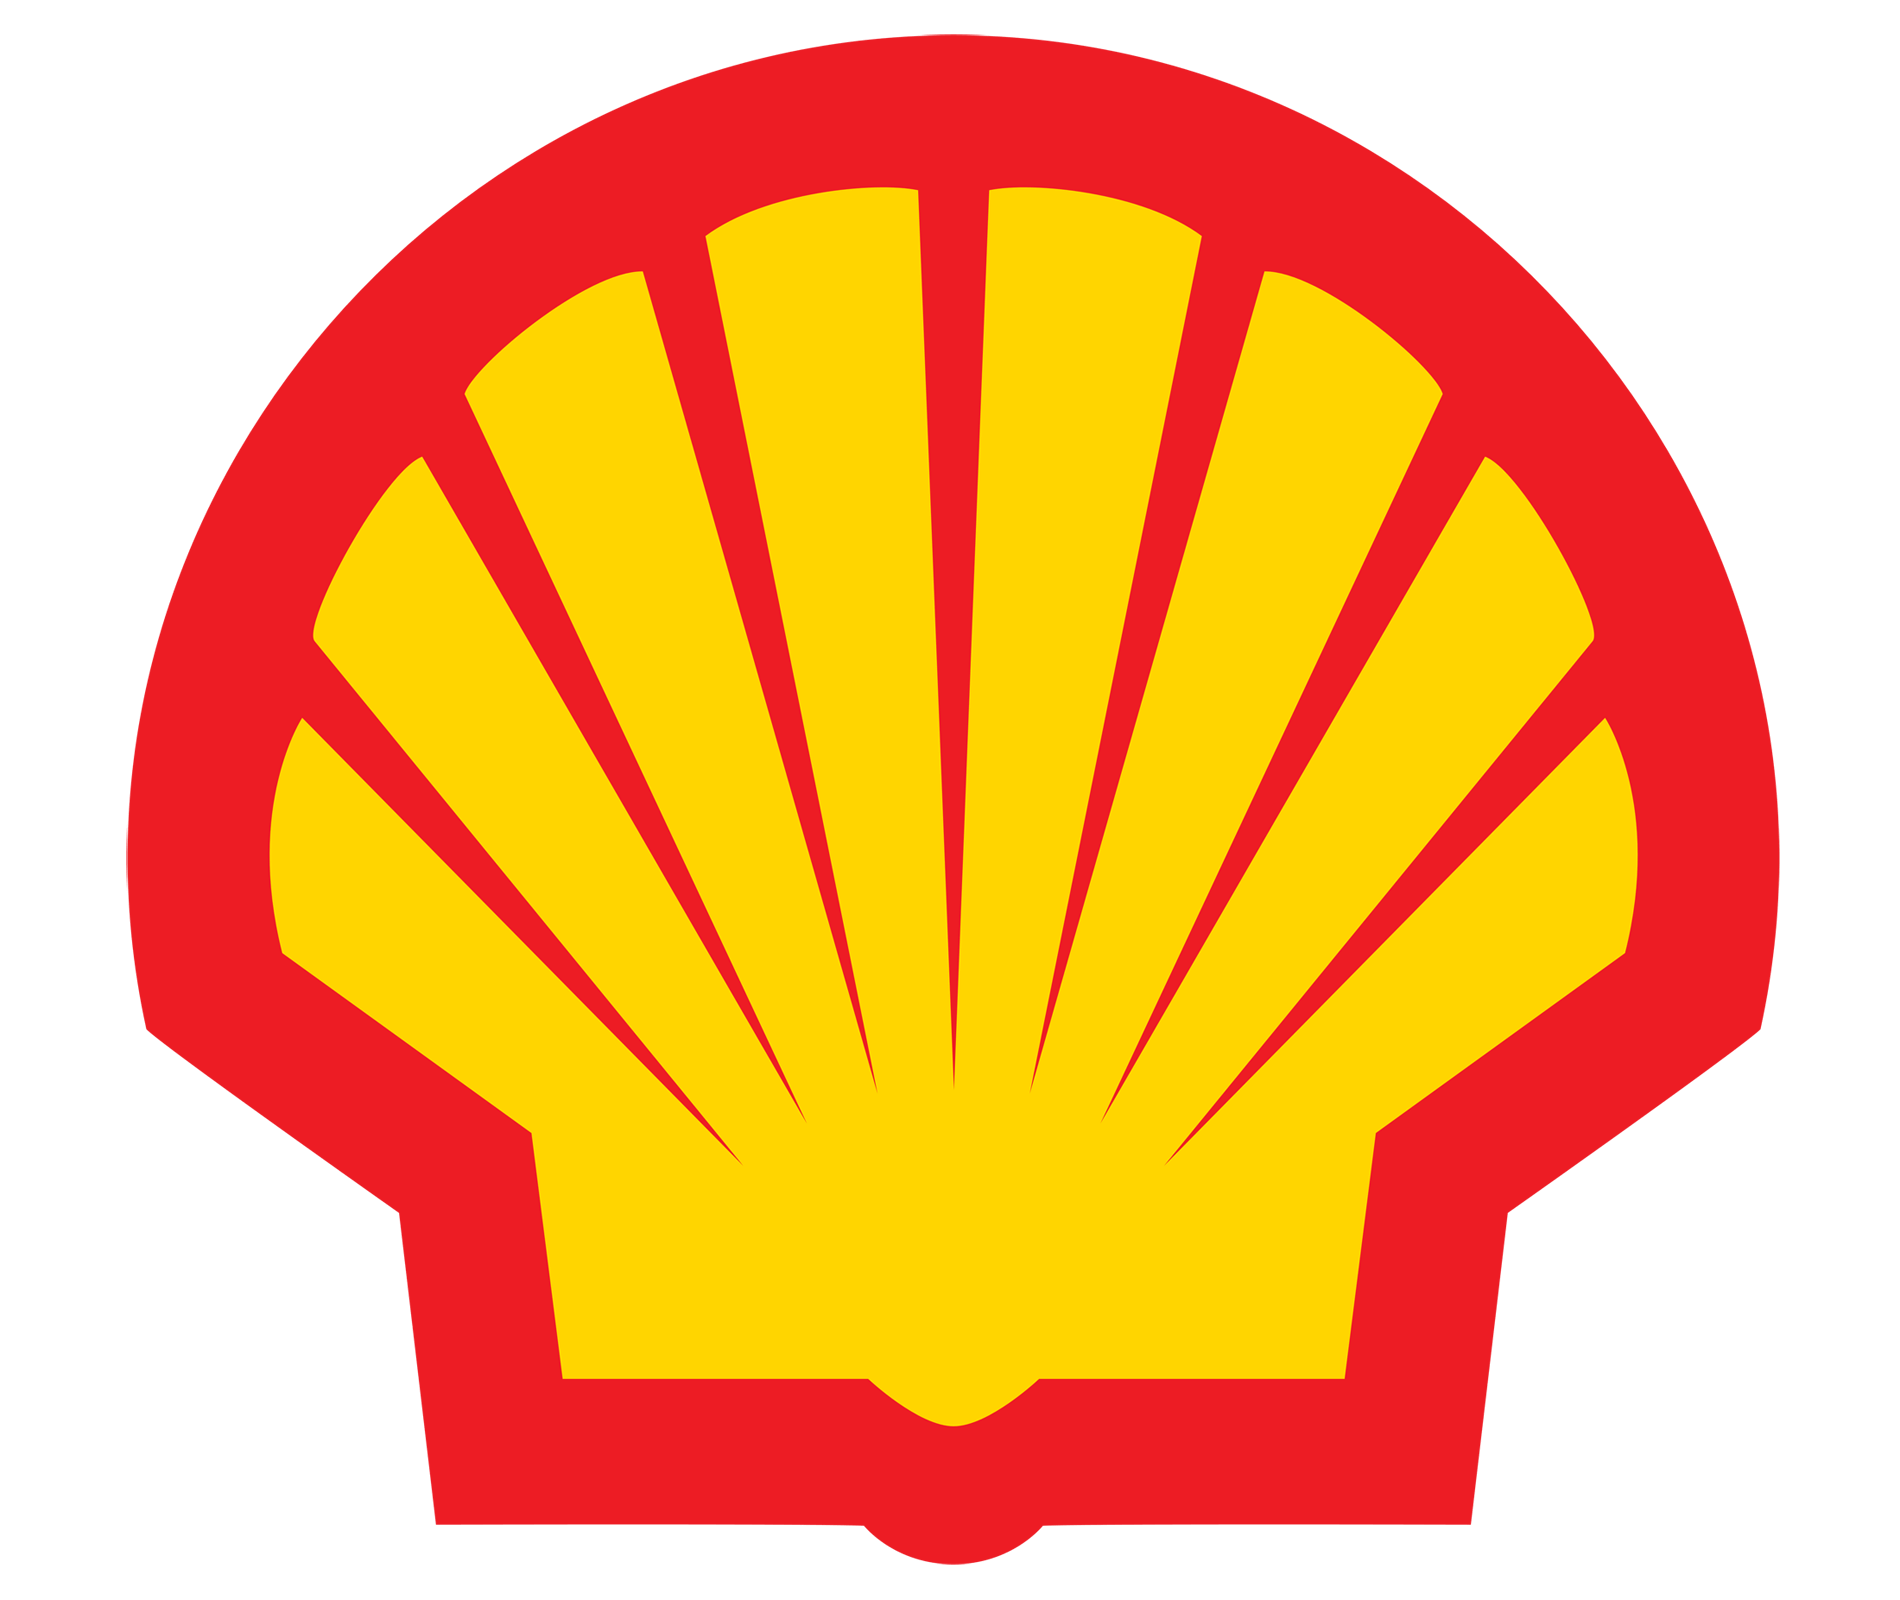 SHELL Engine Room brands for yachts and superyachts